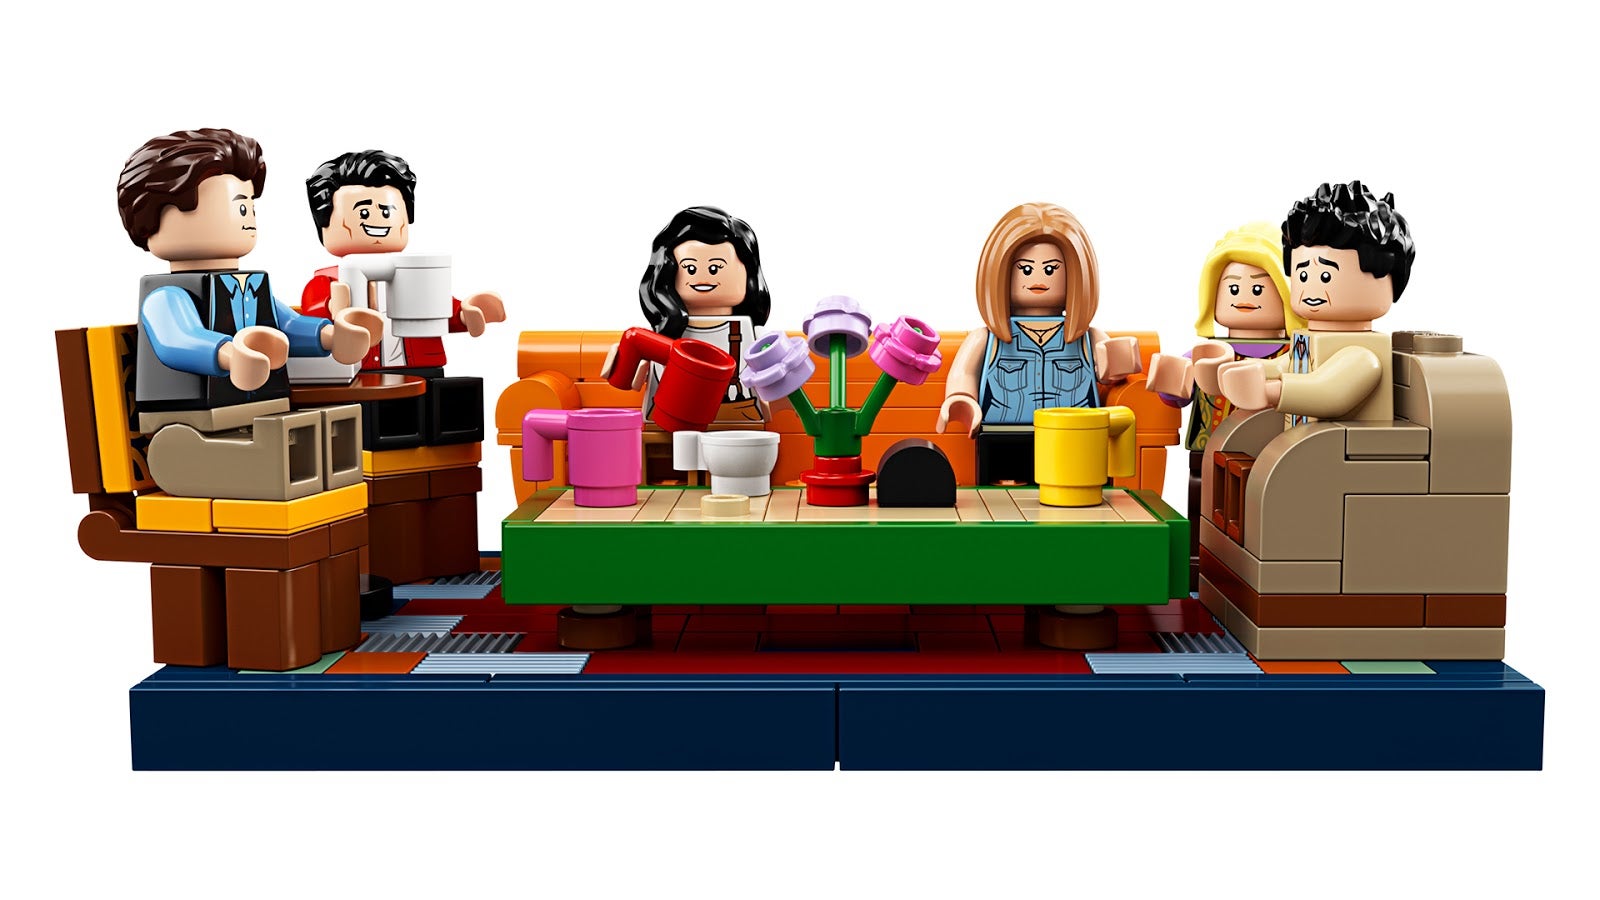 Lego’s Friends Central Perk Set Is An Impressive Collection Of Tiny White People